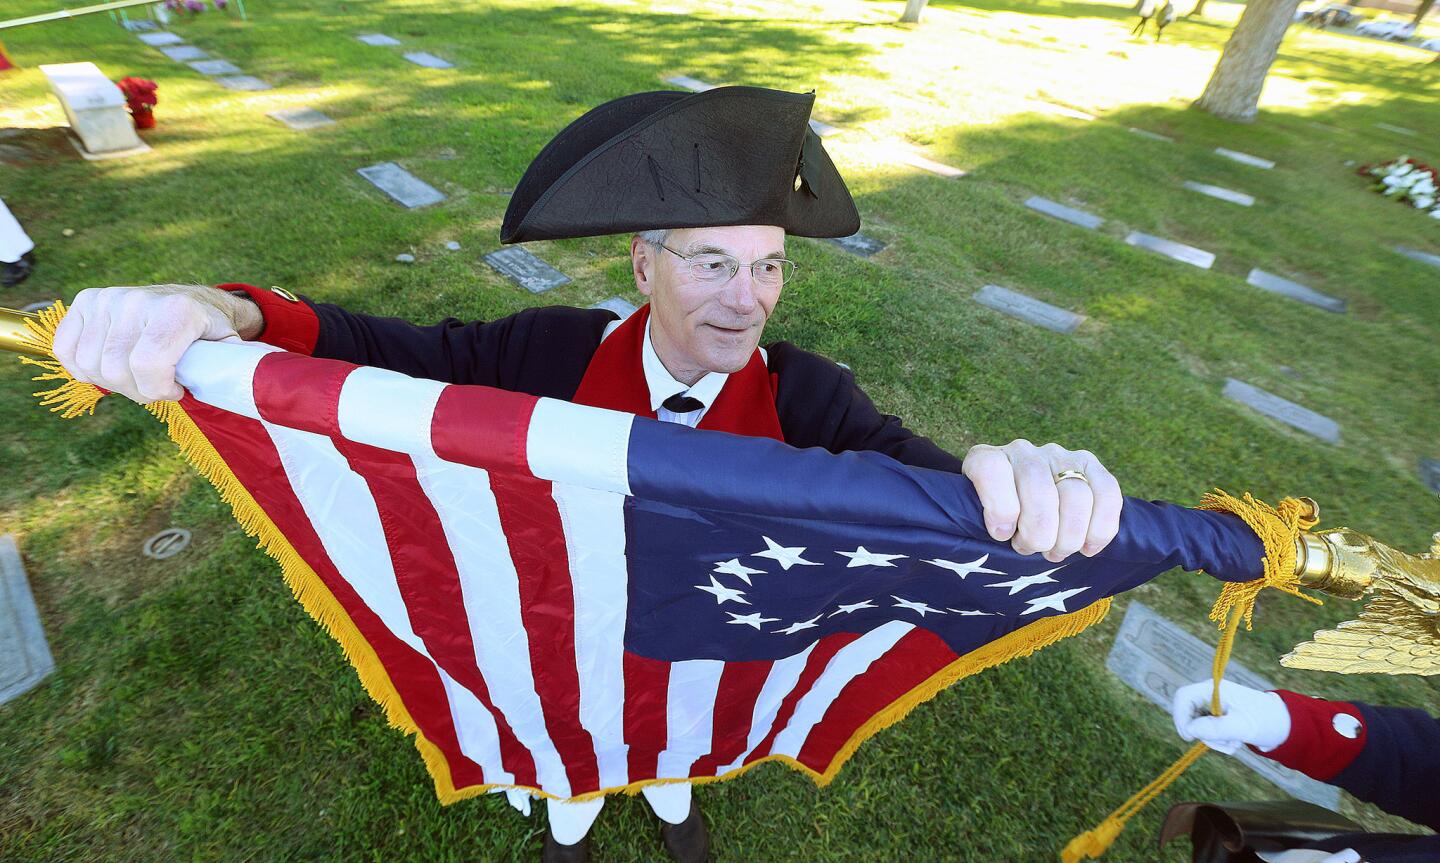 Jim Klingler, a member of the Orange County chapters of Sons of the American Revolution, rolls up a 13-star Betsy Ross Flag at a ceremony to commemorate Wreaths Across America Day at Memory Garden Memorial Park in Brea on Dec. 15. With assistance from veterans, junior ROTC programs and wreath sponsors representing military eras spanning from the American Revolution to today, more than 3,500 wreaths were placed on markers in the cemetery, starting in the Veterans' Field of Honor. Brea is one of nearly 1,000 locations where Wreaths Across America Day is commemorated.